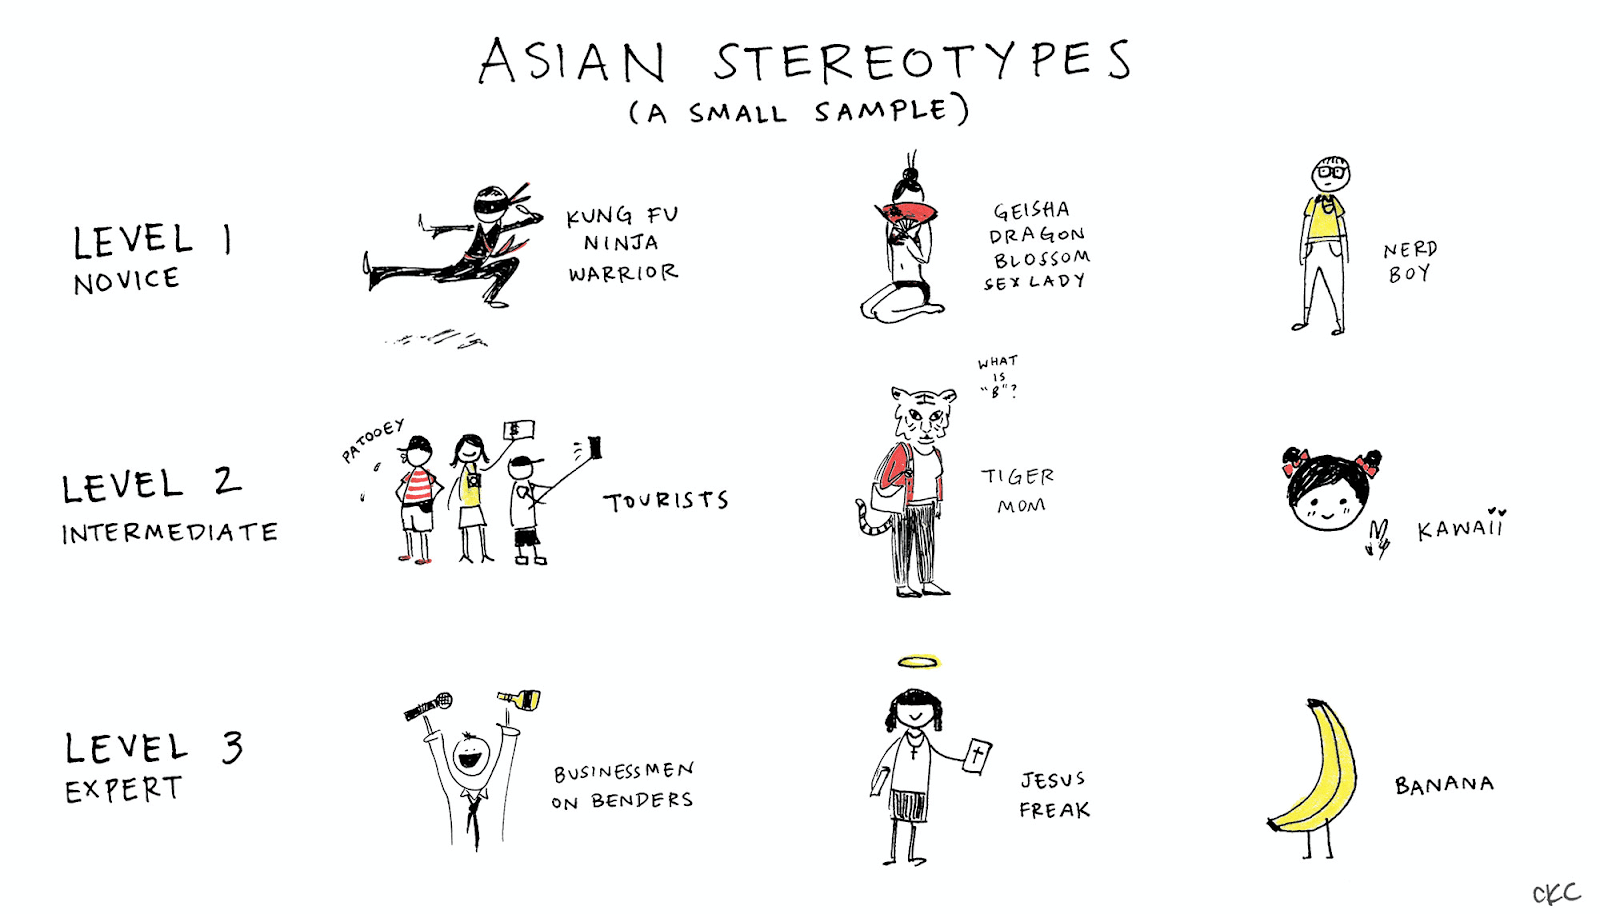 Stereotypes Of Asians